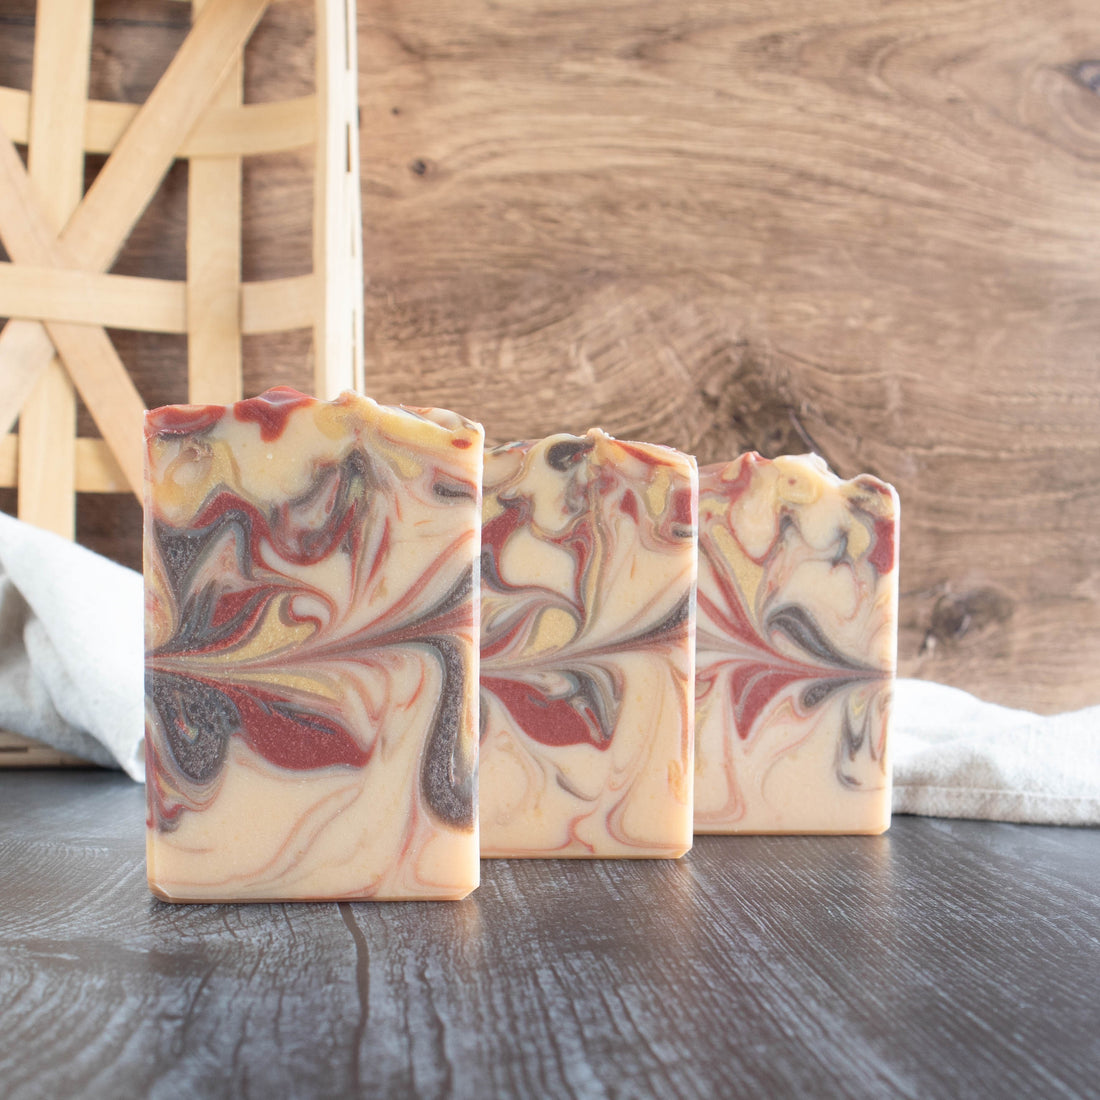 3 susnset soaps lined up in a diagonal. They have a cream base with a rust red, brown and yellow swirl. They are sitting on a black wood base with a walnut wood background. There is a creamy towel in the background as well.